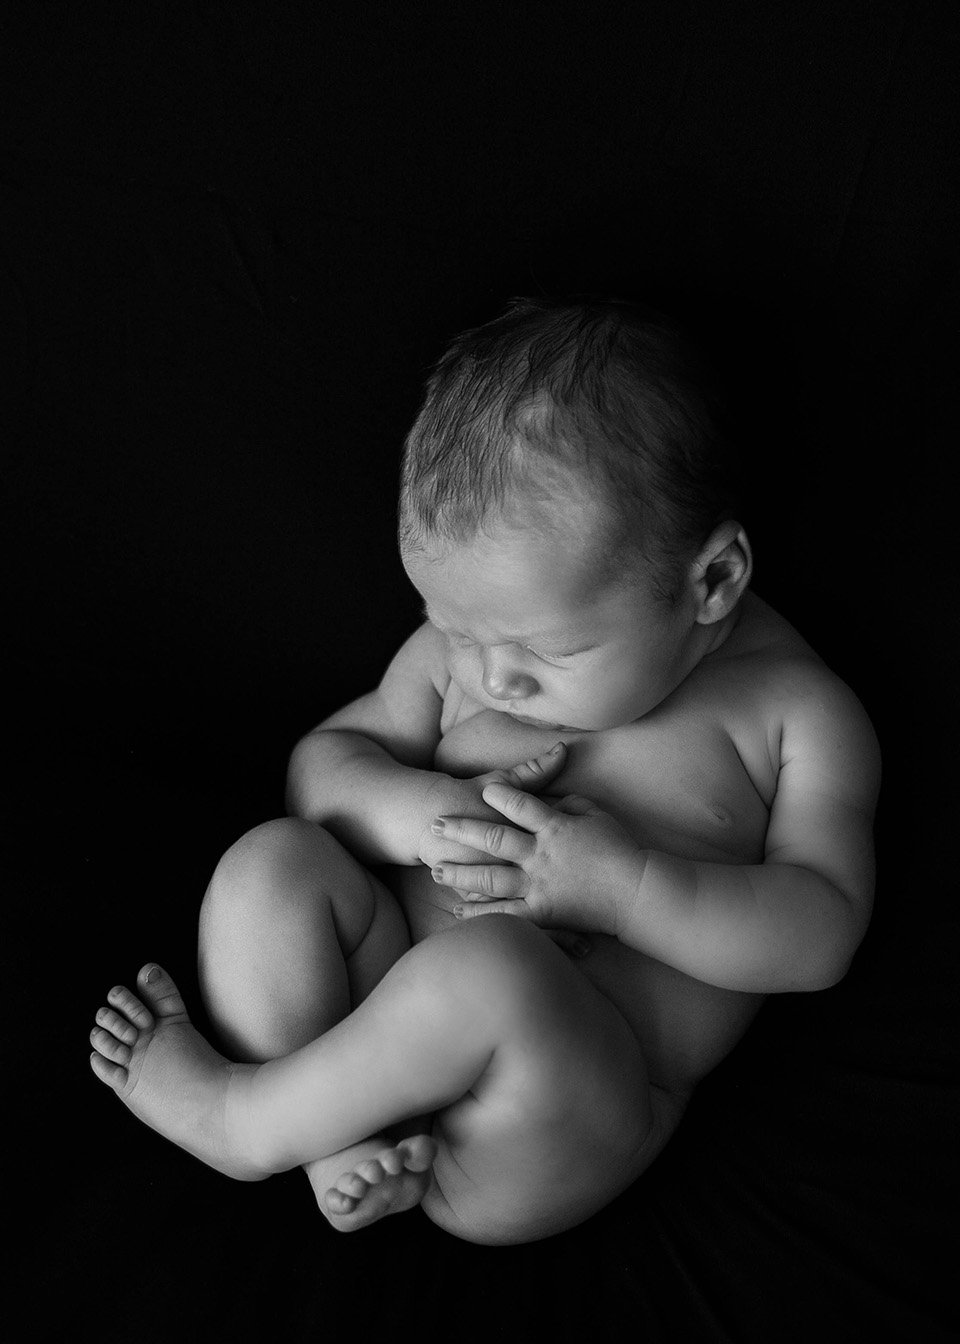 Simple Newborn Photos, Rochester Newborn Photography, Mischief and Laughs Photography